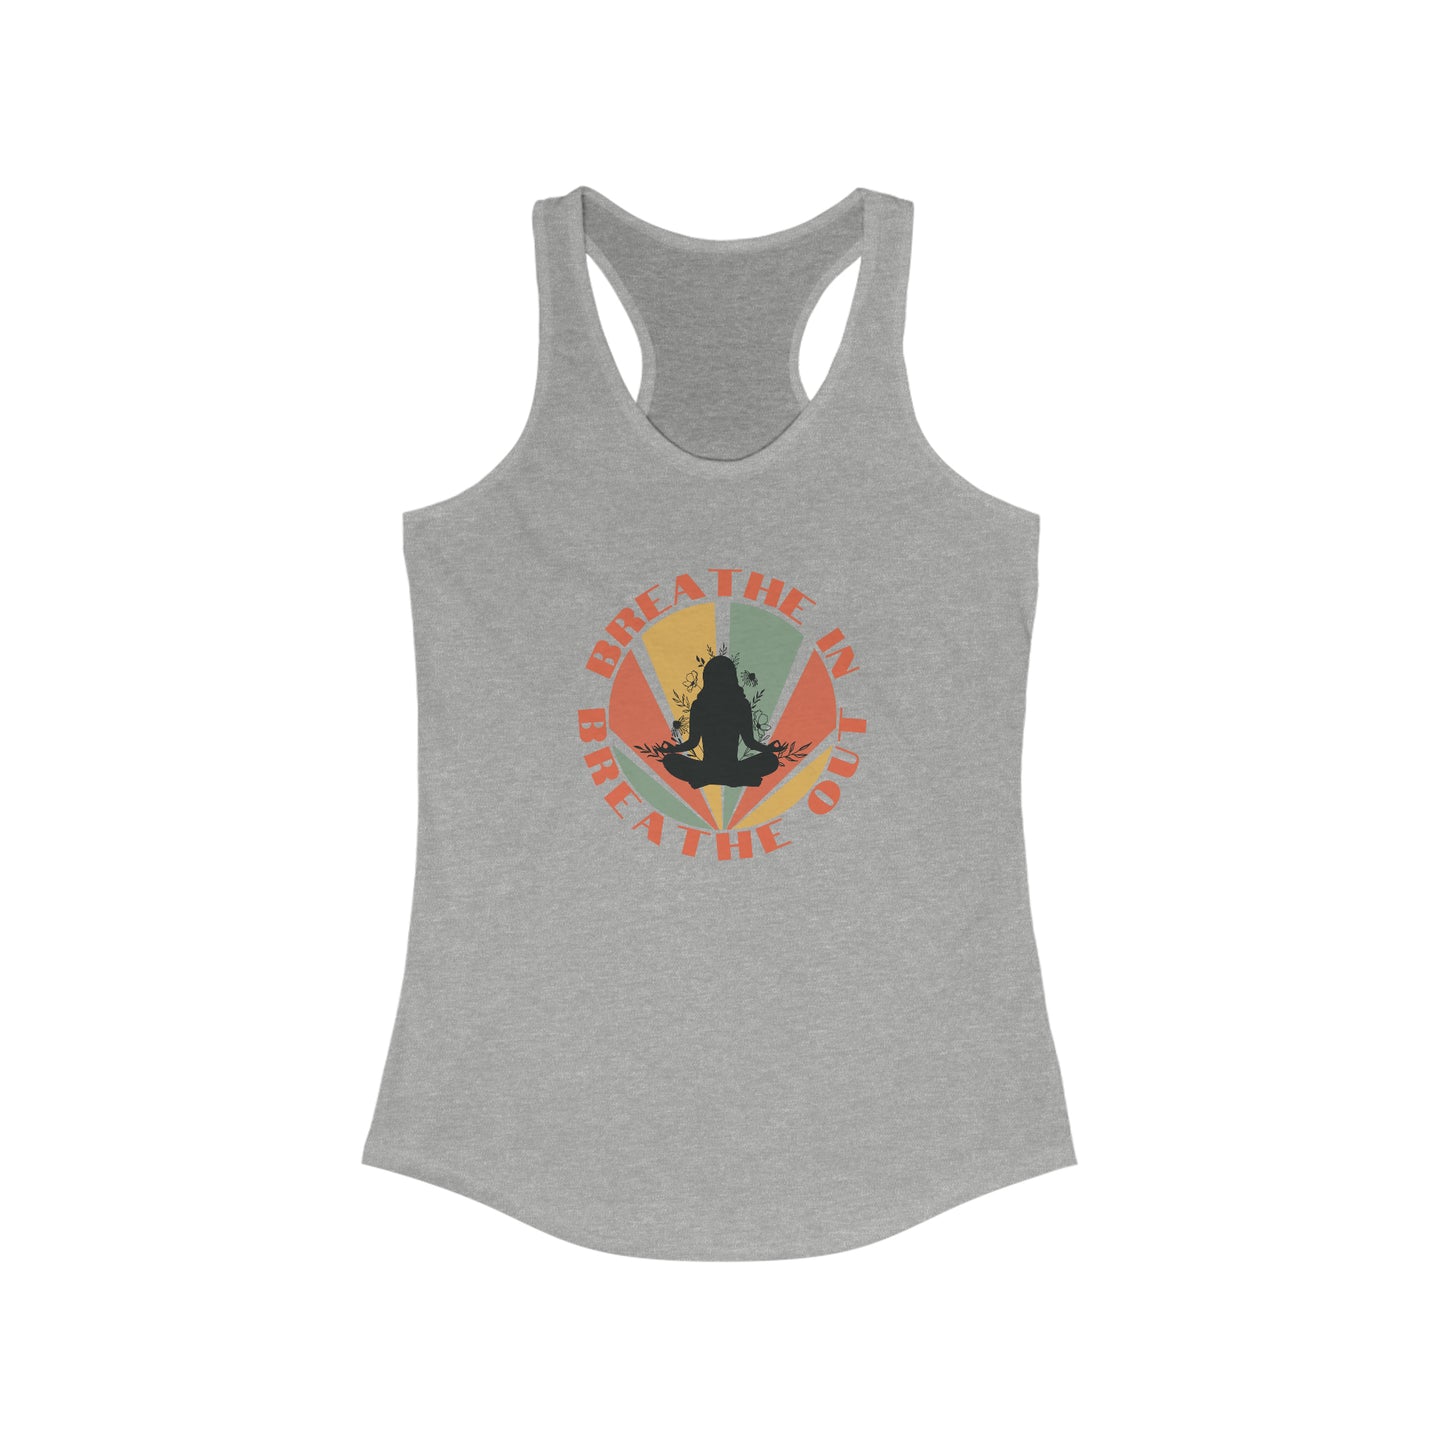 Breathe In Breathe Out  - Yoga Inspired Tank Top